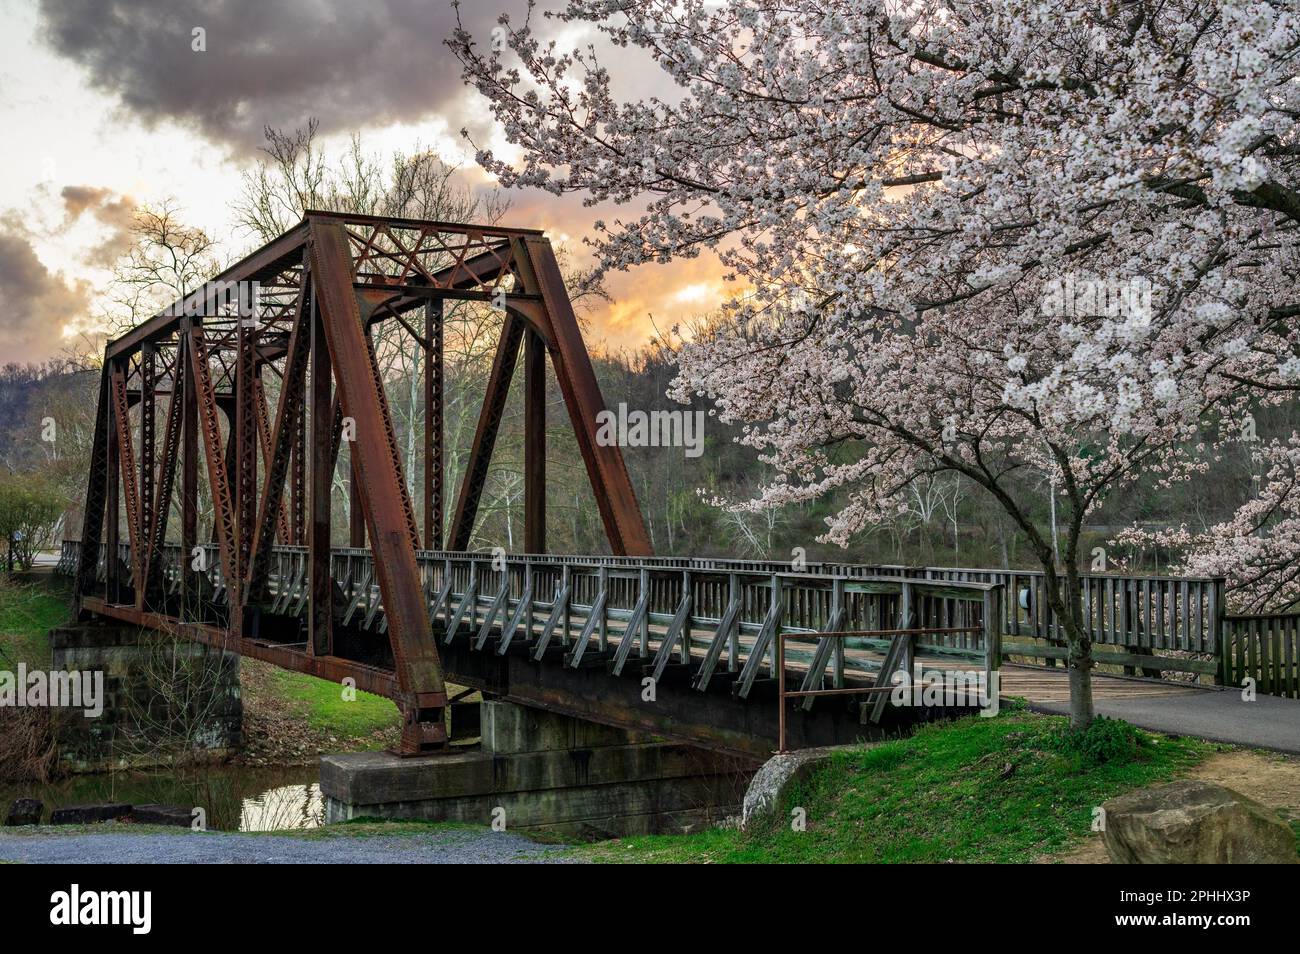 Old steel girder bridge carrying walking and cycling trail in Morgantown WV over Deckers Creek with cherry blossoms blooming in the spring Stock Photo